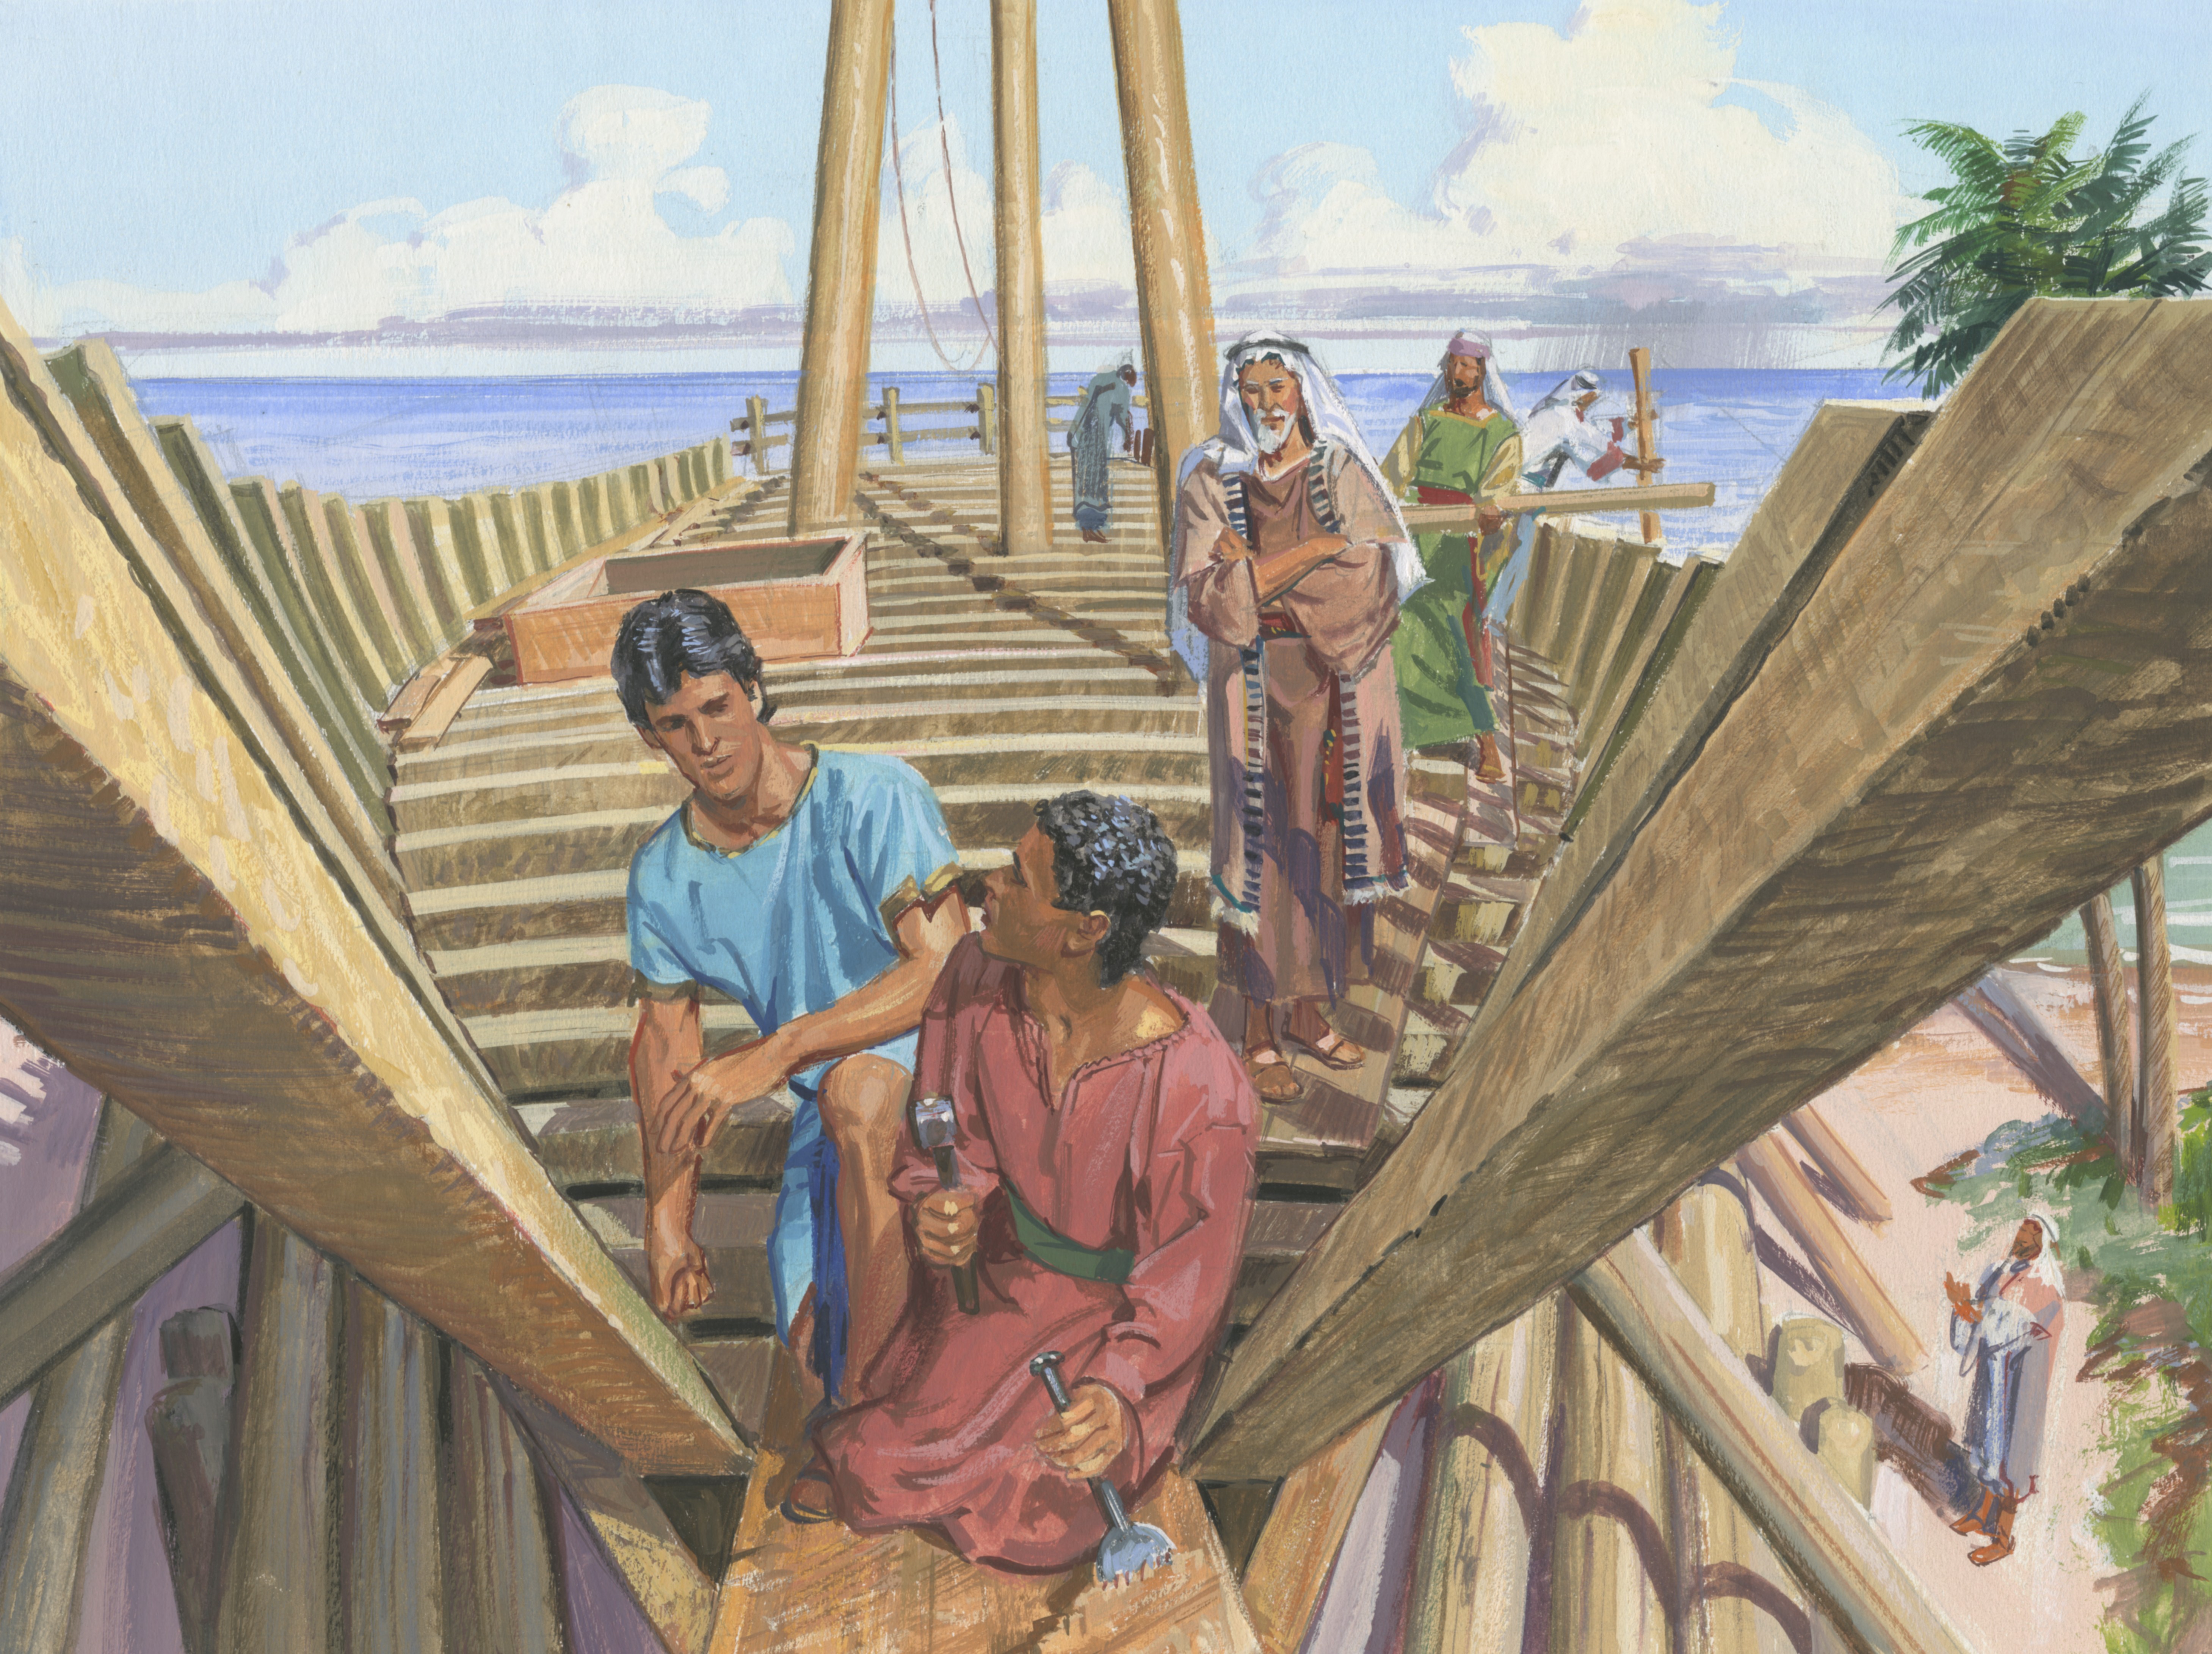 And it came to pass that they did worship the Lord, and did go forth with me; and we did work timbers of curious workmanship. And the Lord did show me from time to time after what manner I should work the timbers of the ship. 
Chapter 7-9 (1 Nephi 18:1)